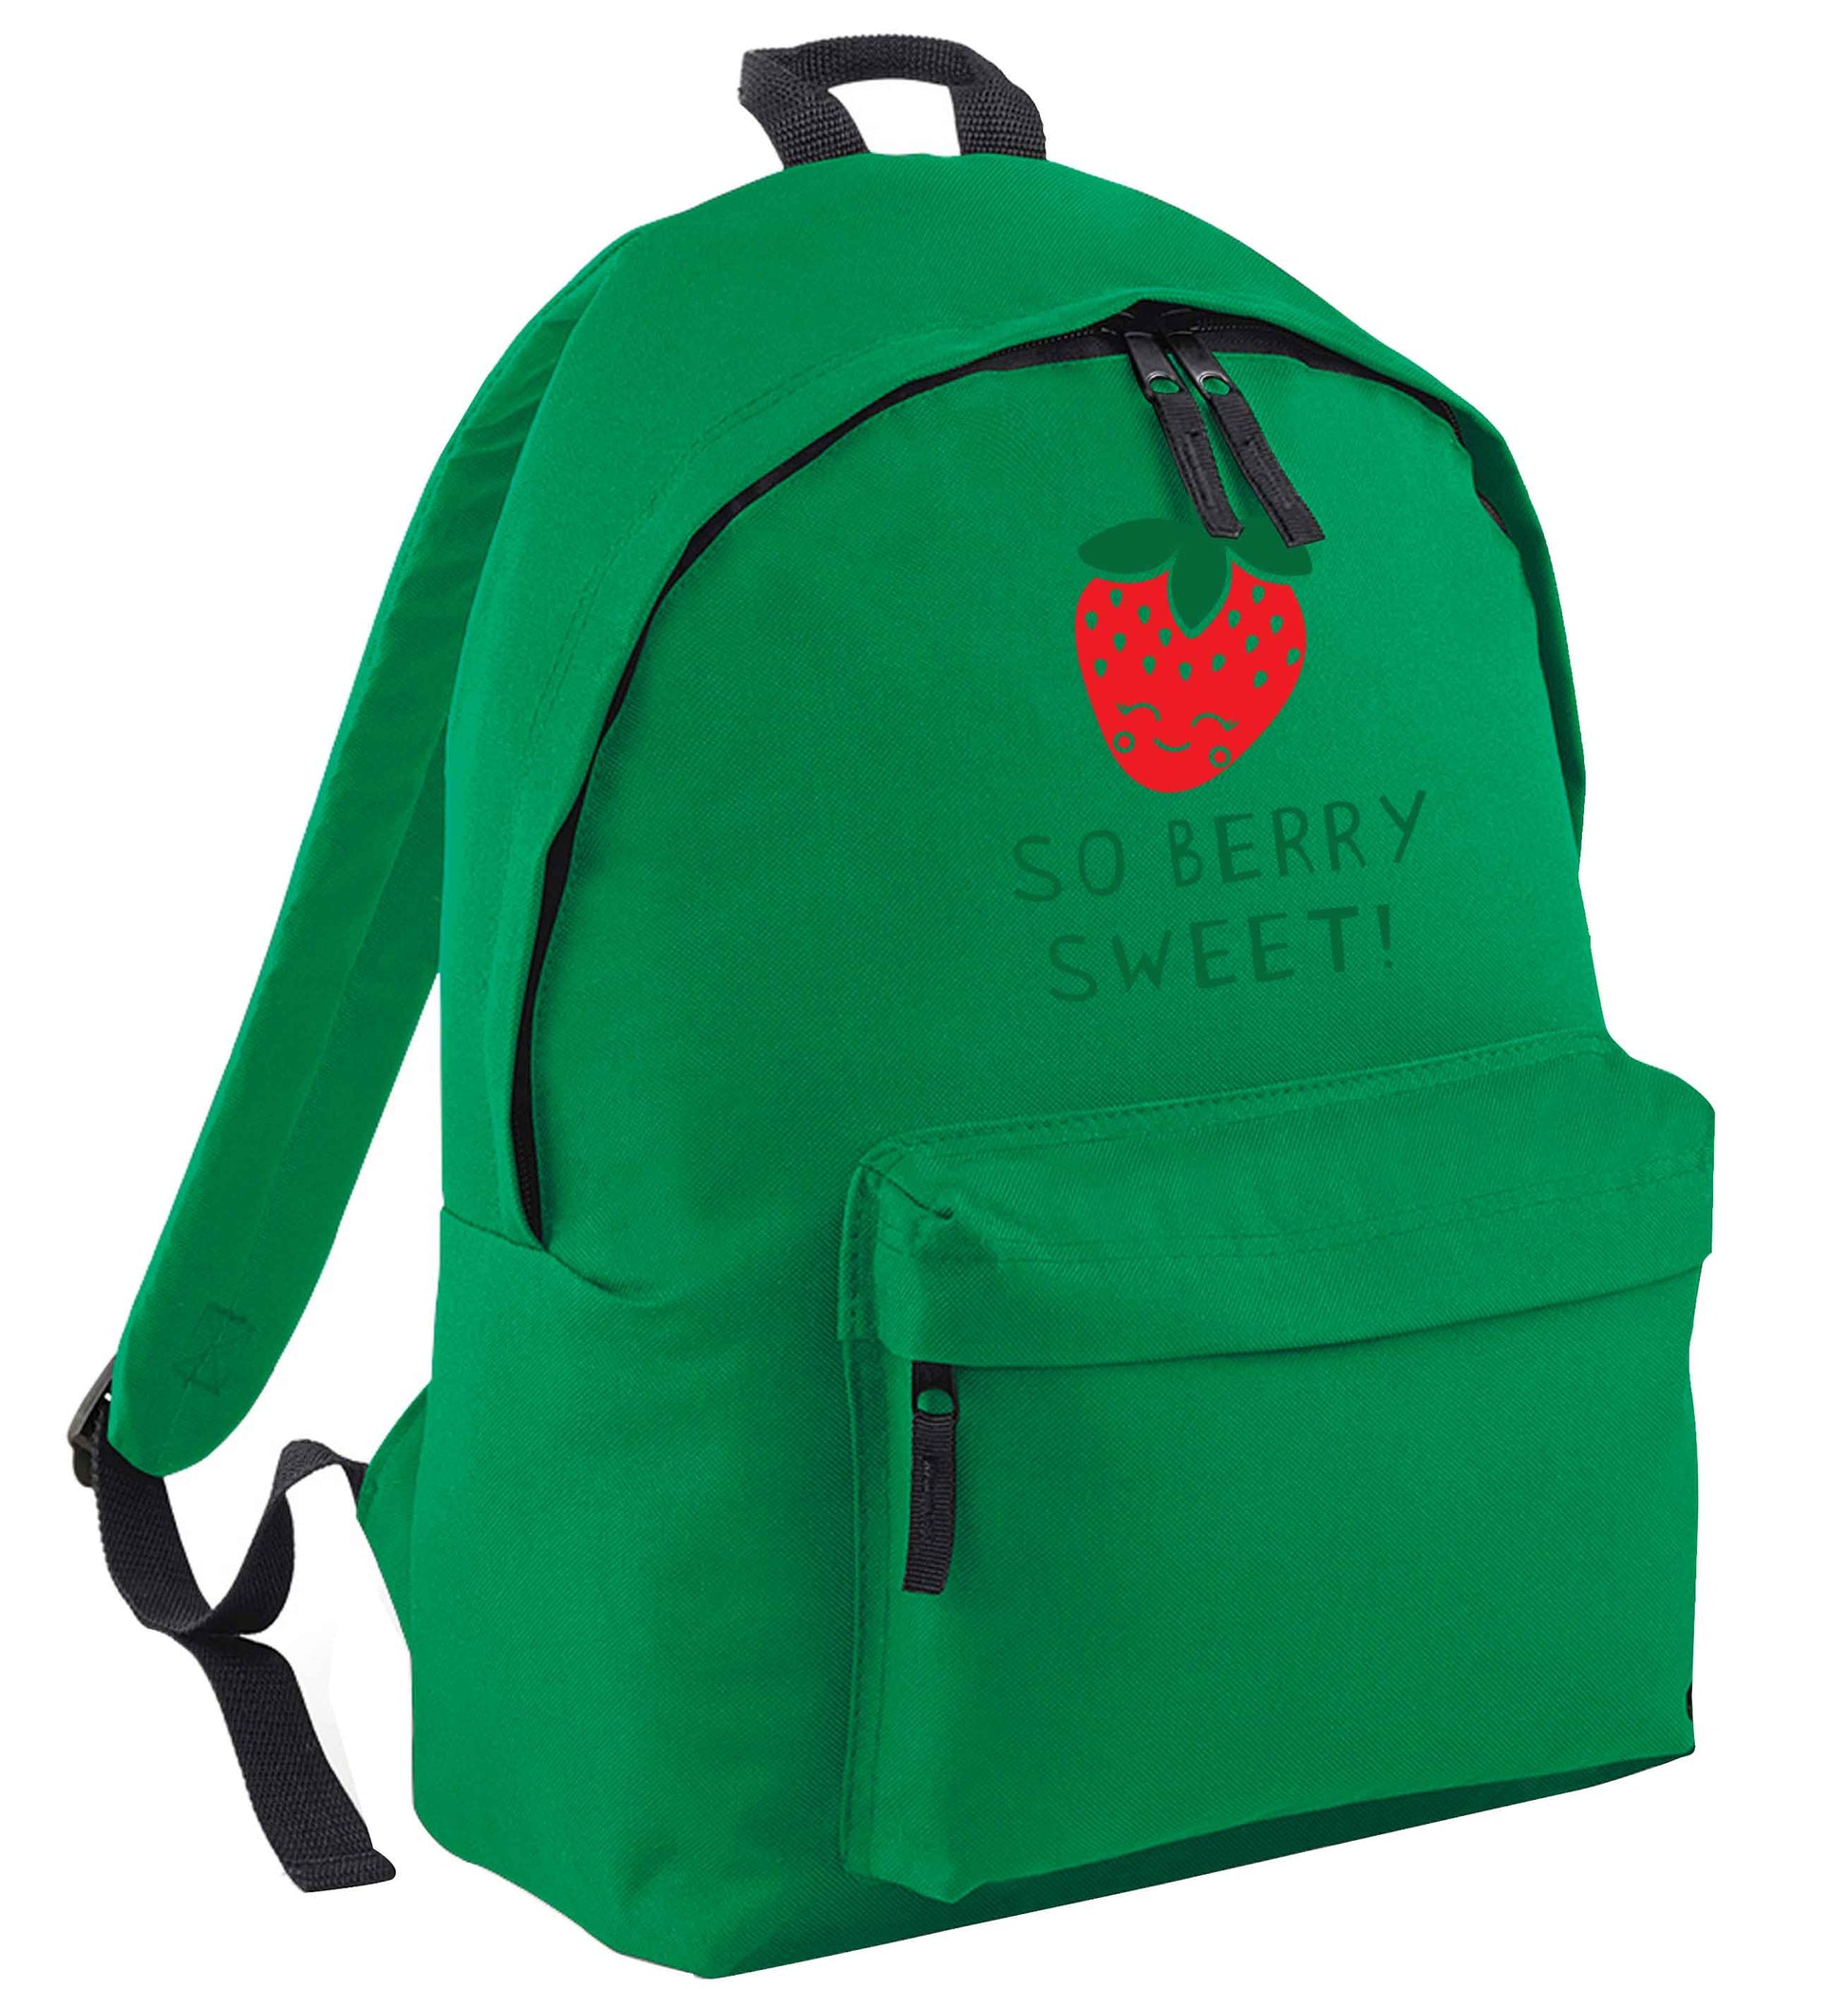 So berry sweet green adults backpack